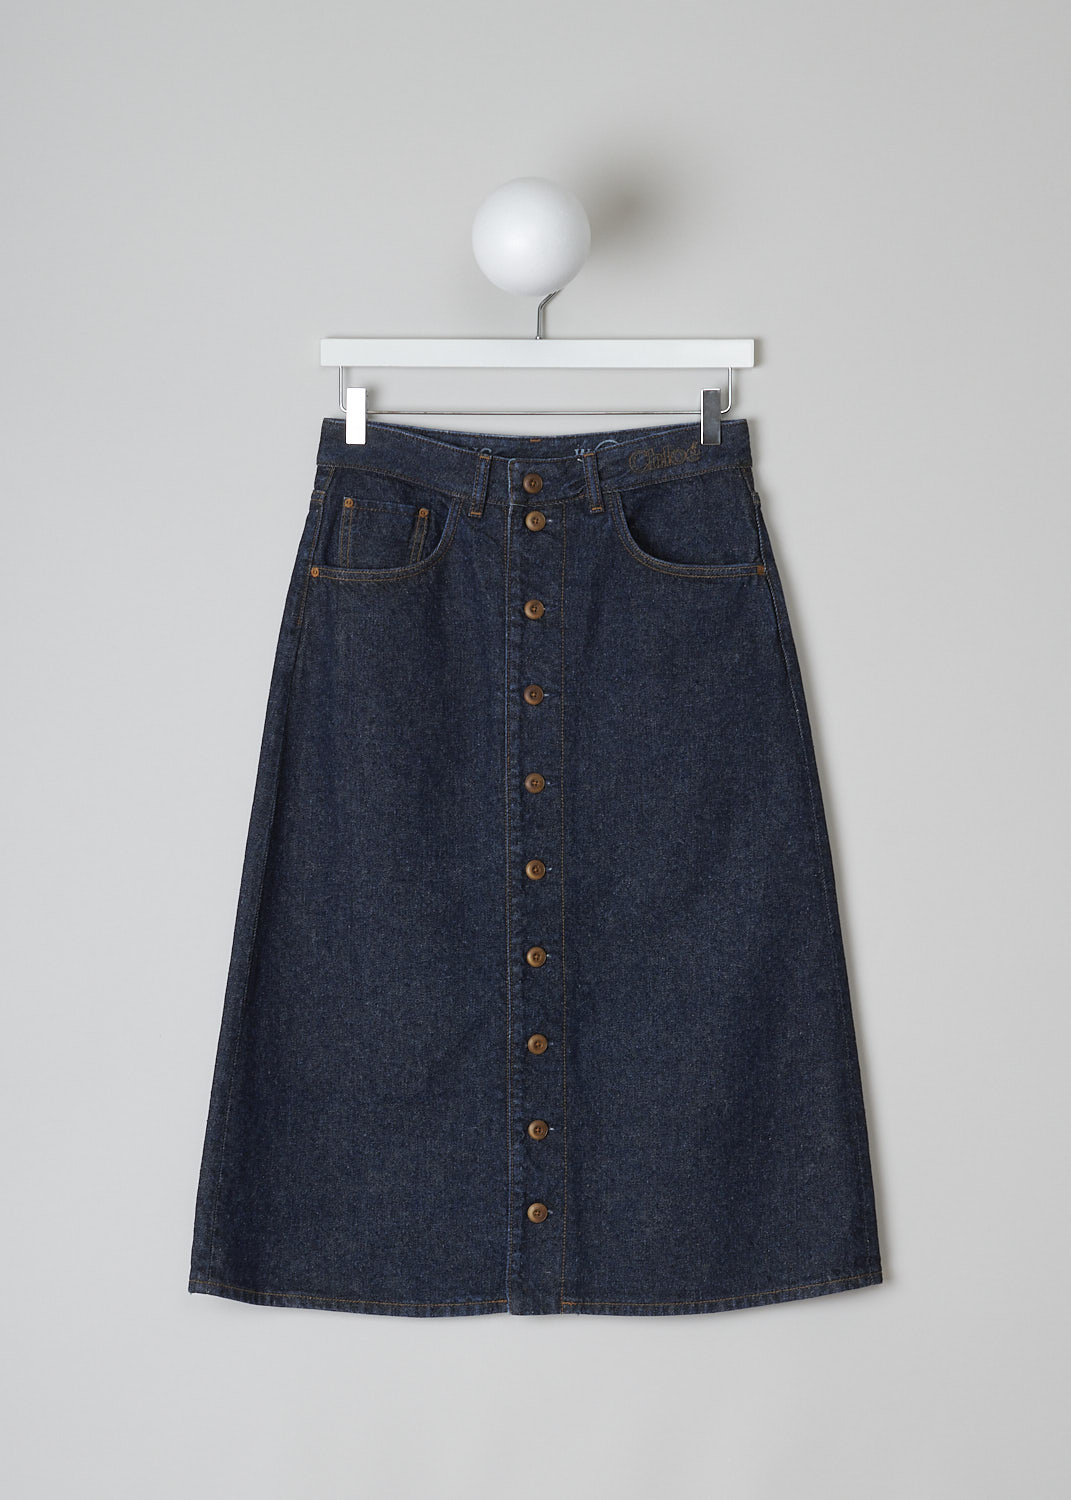 CHLOÃ‰, A-LINE DENIM MIDI SKIRT IN ICONIC NAVY, CHC22ADJ6615748A_SKIRT_ICONIC_NAVY, Blue, Front, This denim A-line midi skirt in Iconic Navy has a waistband with belt loops and the brand's logo embroidered on the front. The skirt has a front button closure. This skirt has a 5-pocket design, with two slanted pockets and a coin pocket in the front and two patch pockets in the back.  
